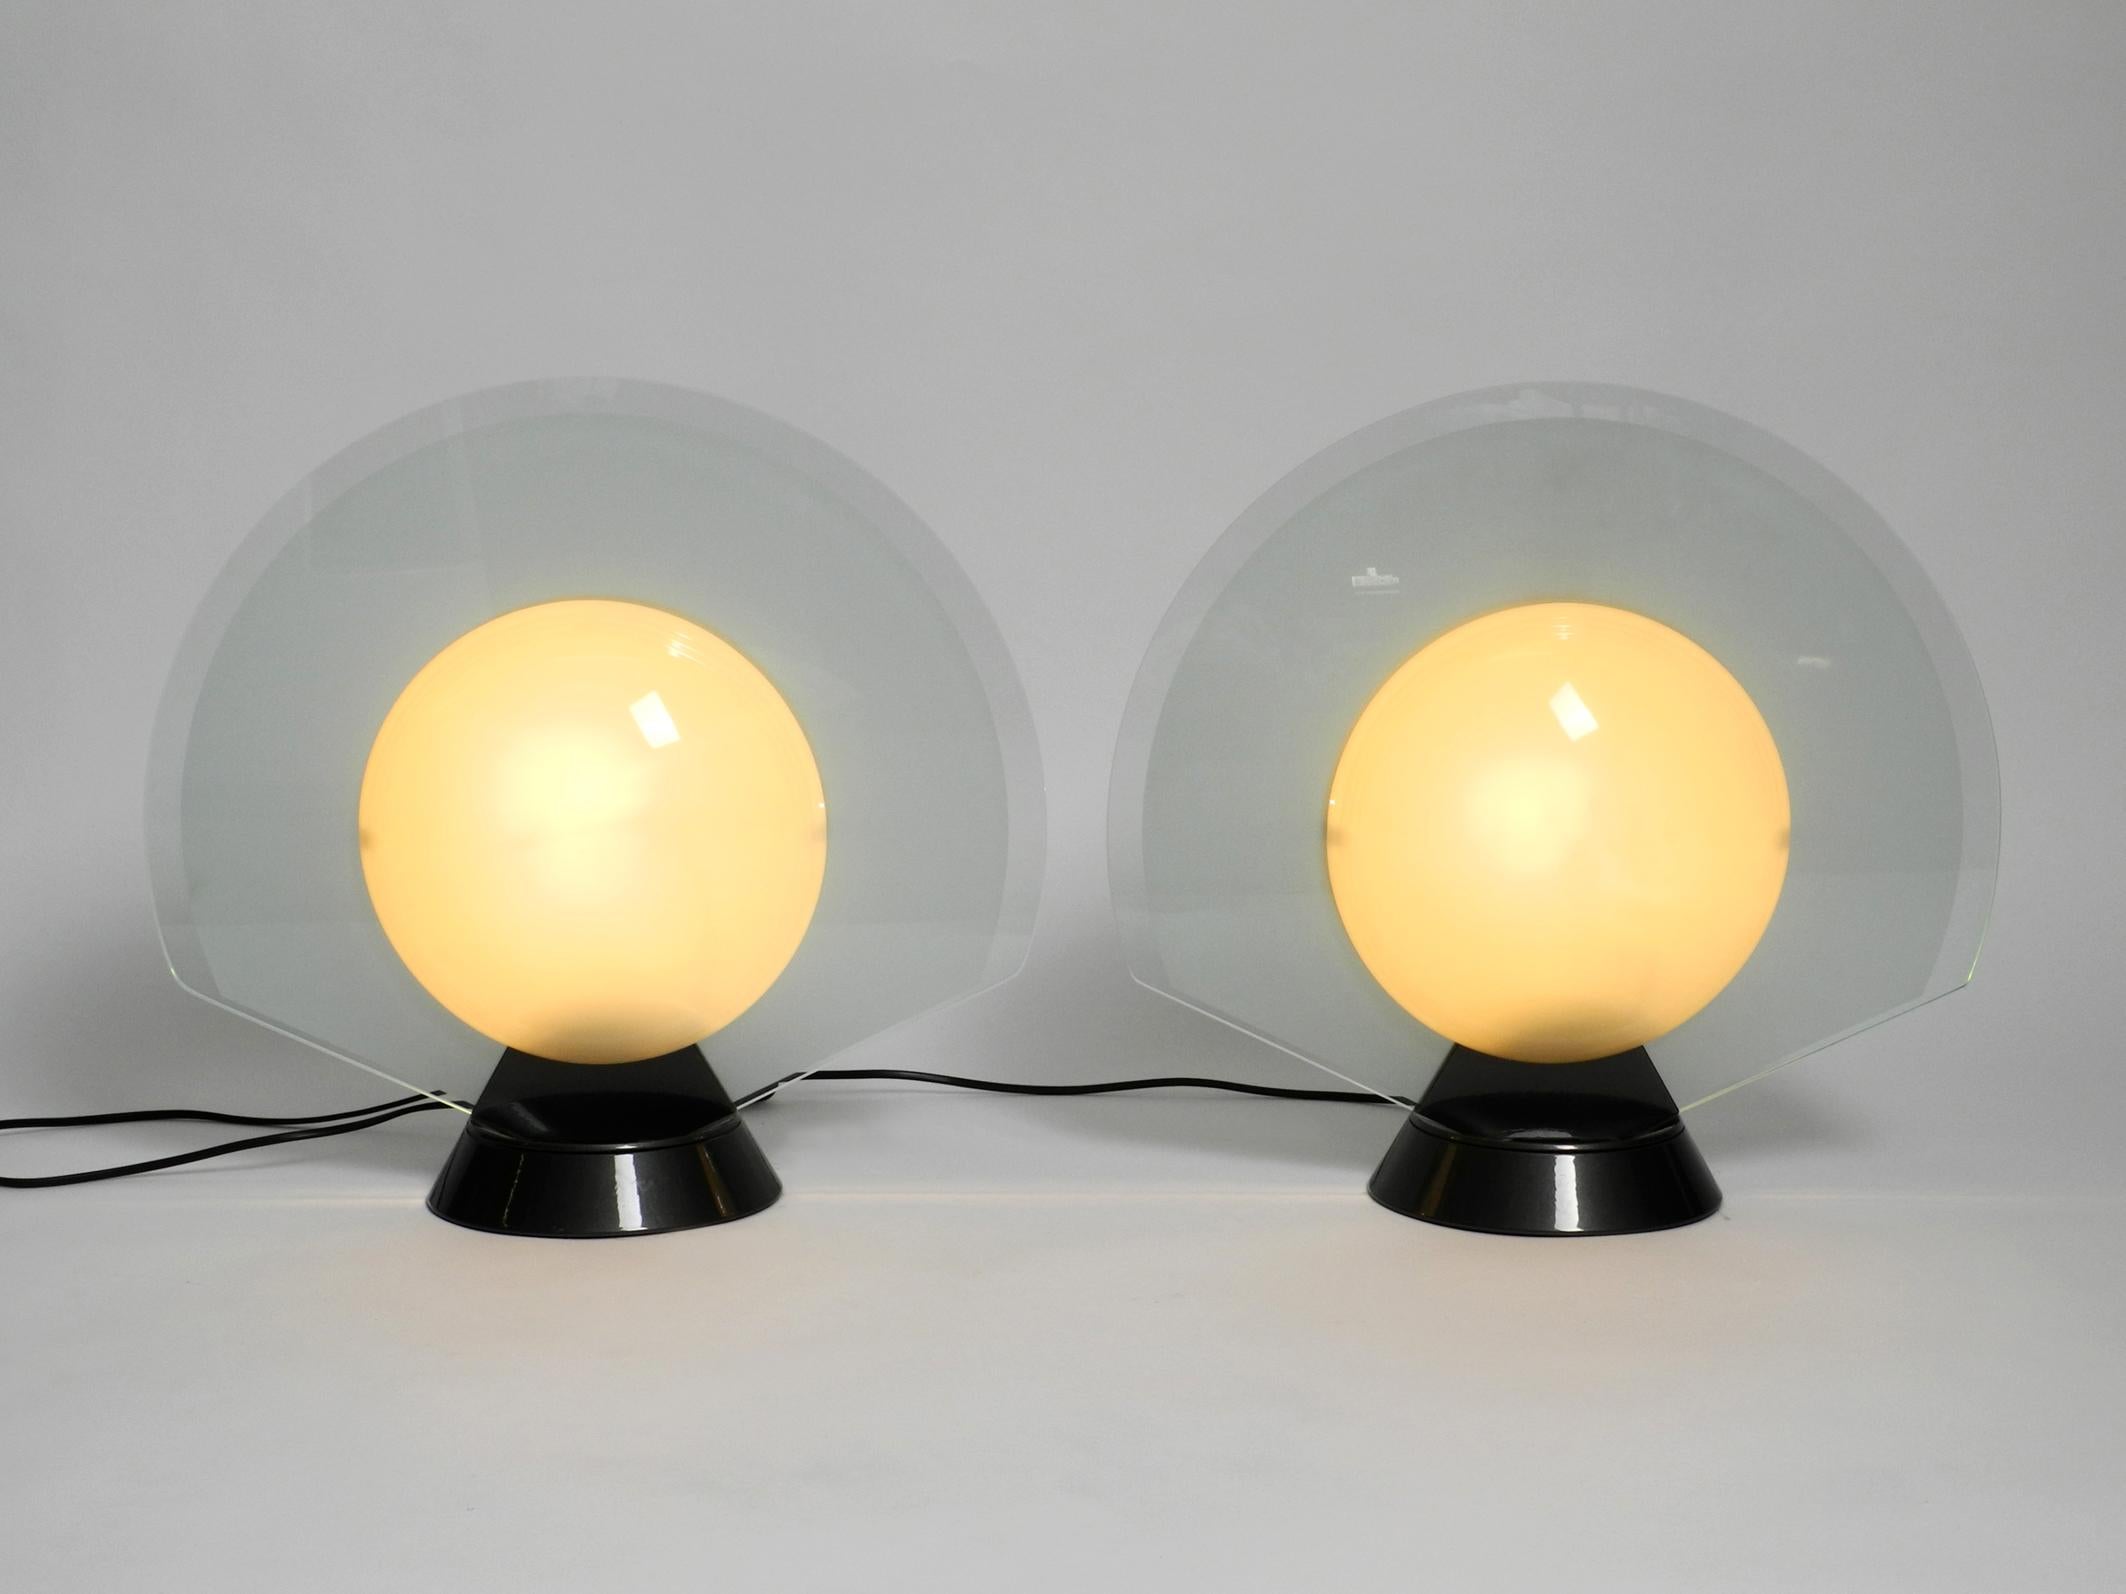 Pair of large 1980s table lamps by Pier Giuseppe Ramella model Tikal.
Made for Arteluce. Made in Italy.
Pier Giuseppe Ramella was a well-known Italian designer and architect.
Typical Postmodern Minimalist design.
Heavy aluminum base can be